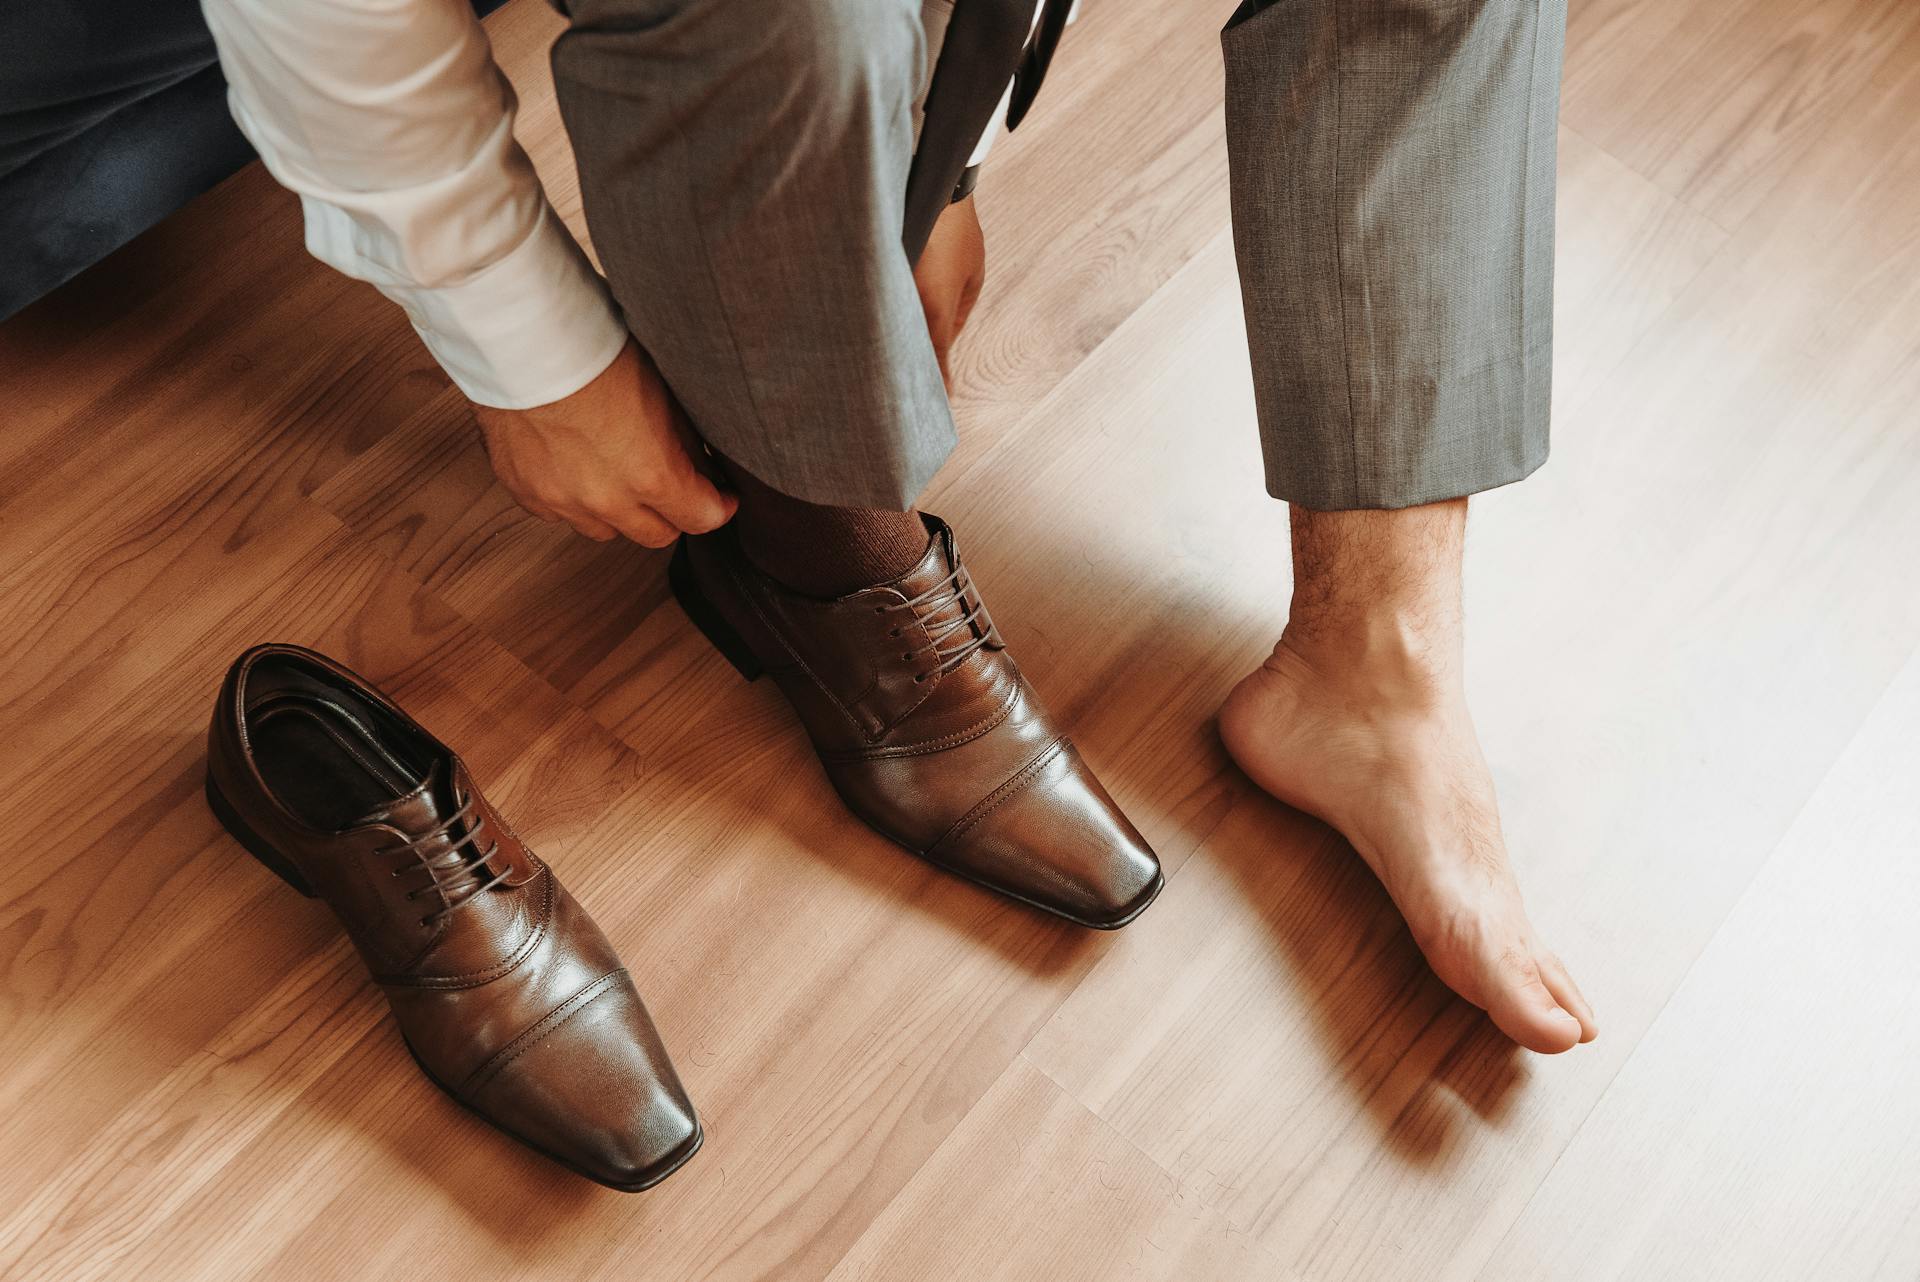 A man putting on his shoes | Source: Pexels